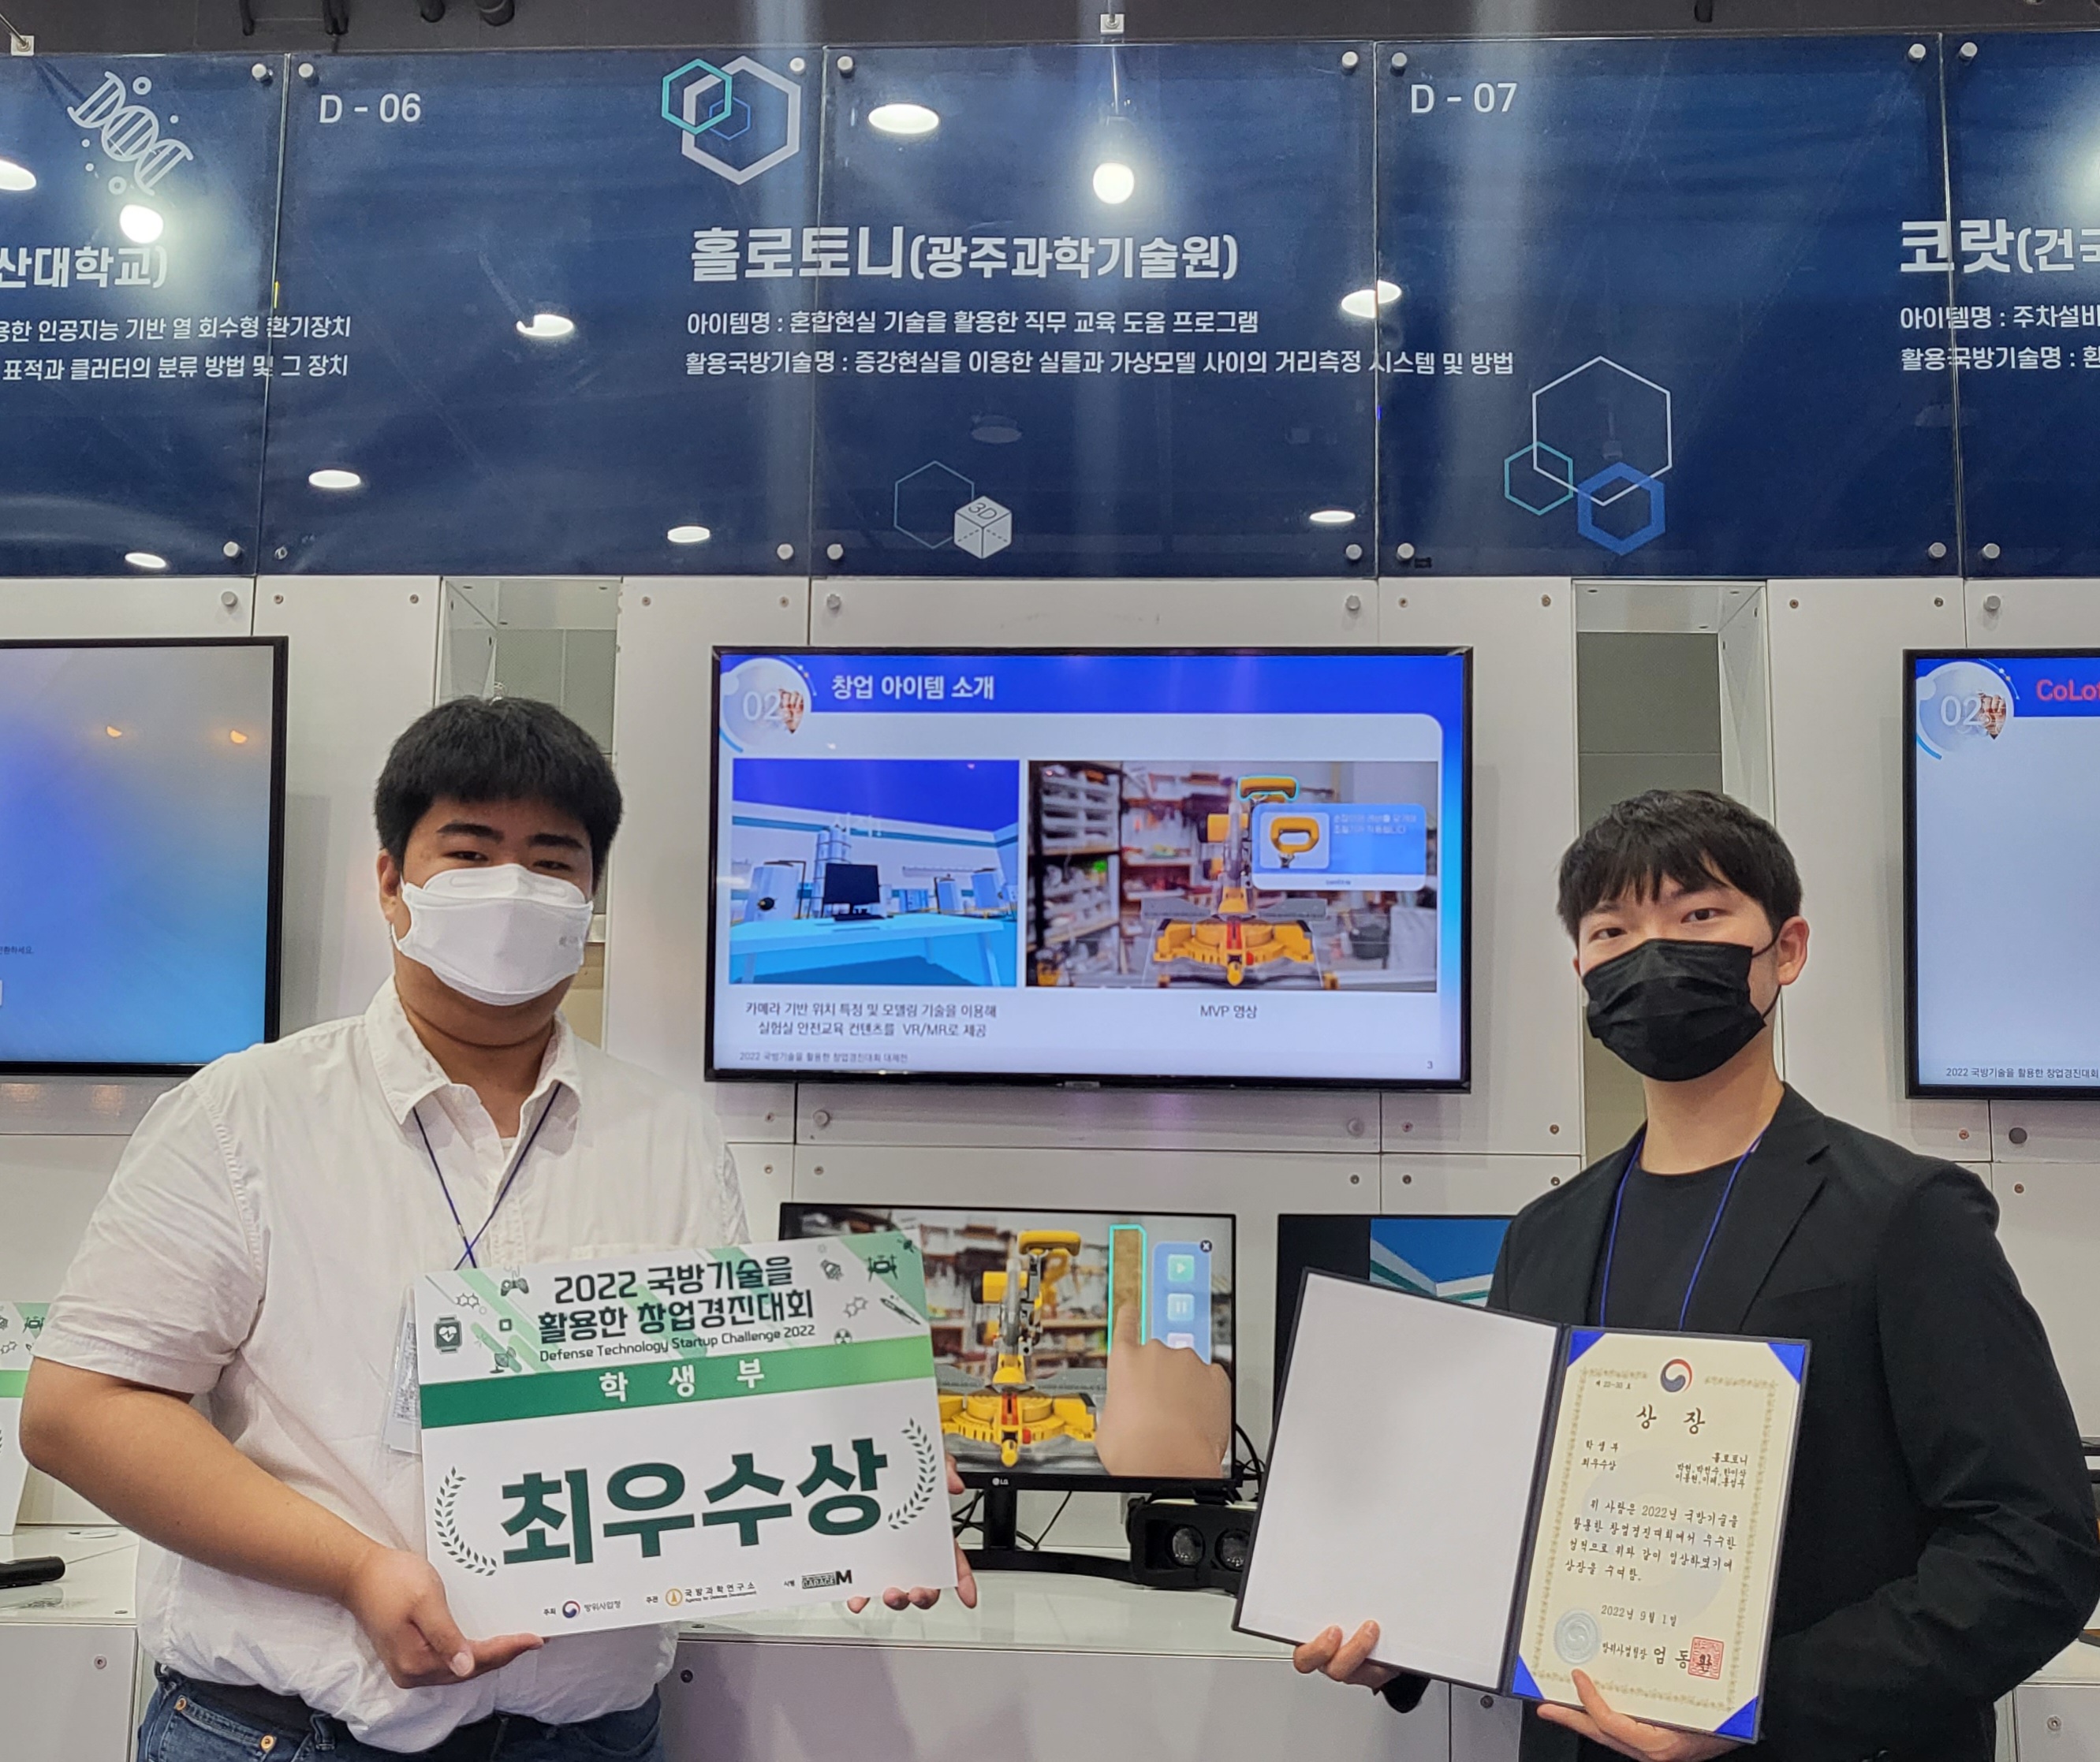 GIST – KAIST – Kwangwoon University Student Union Team, ‘Defense Technology’ Startup Competition Grand Prize 이미지